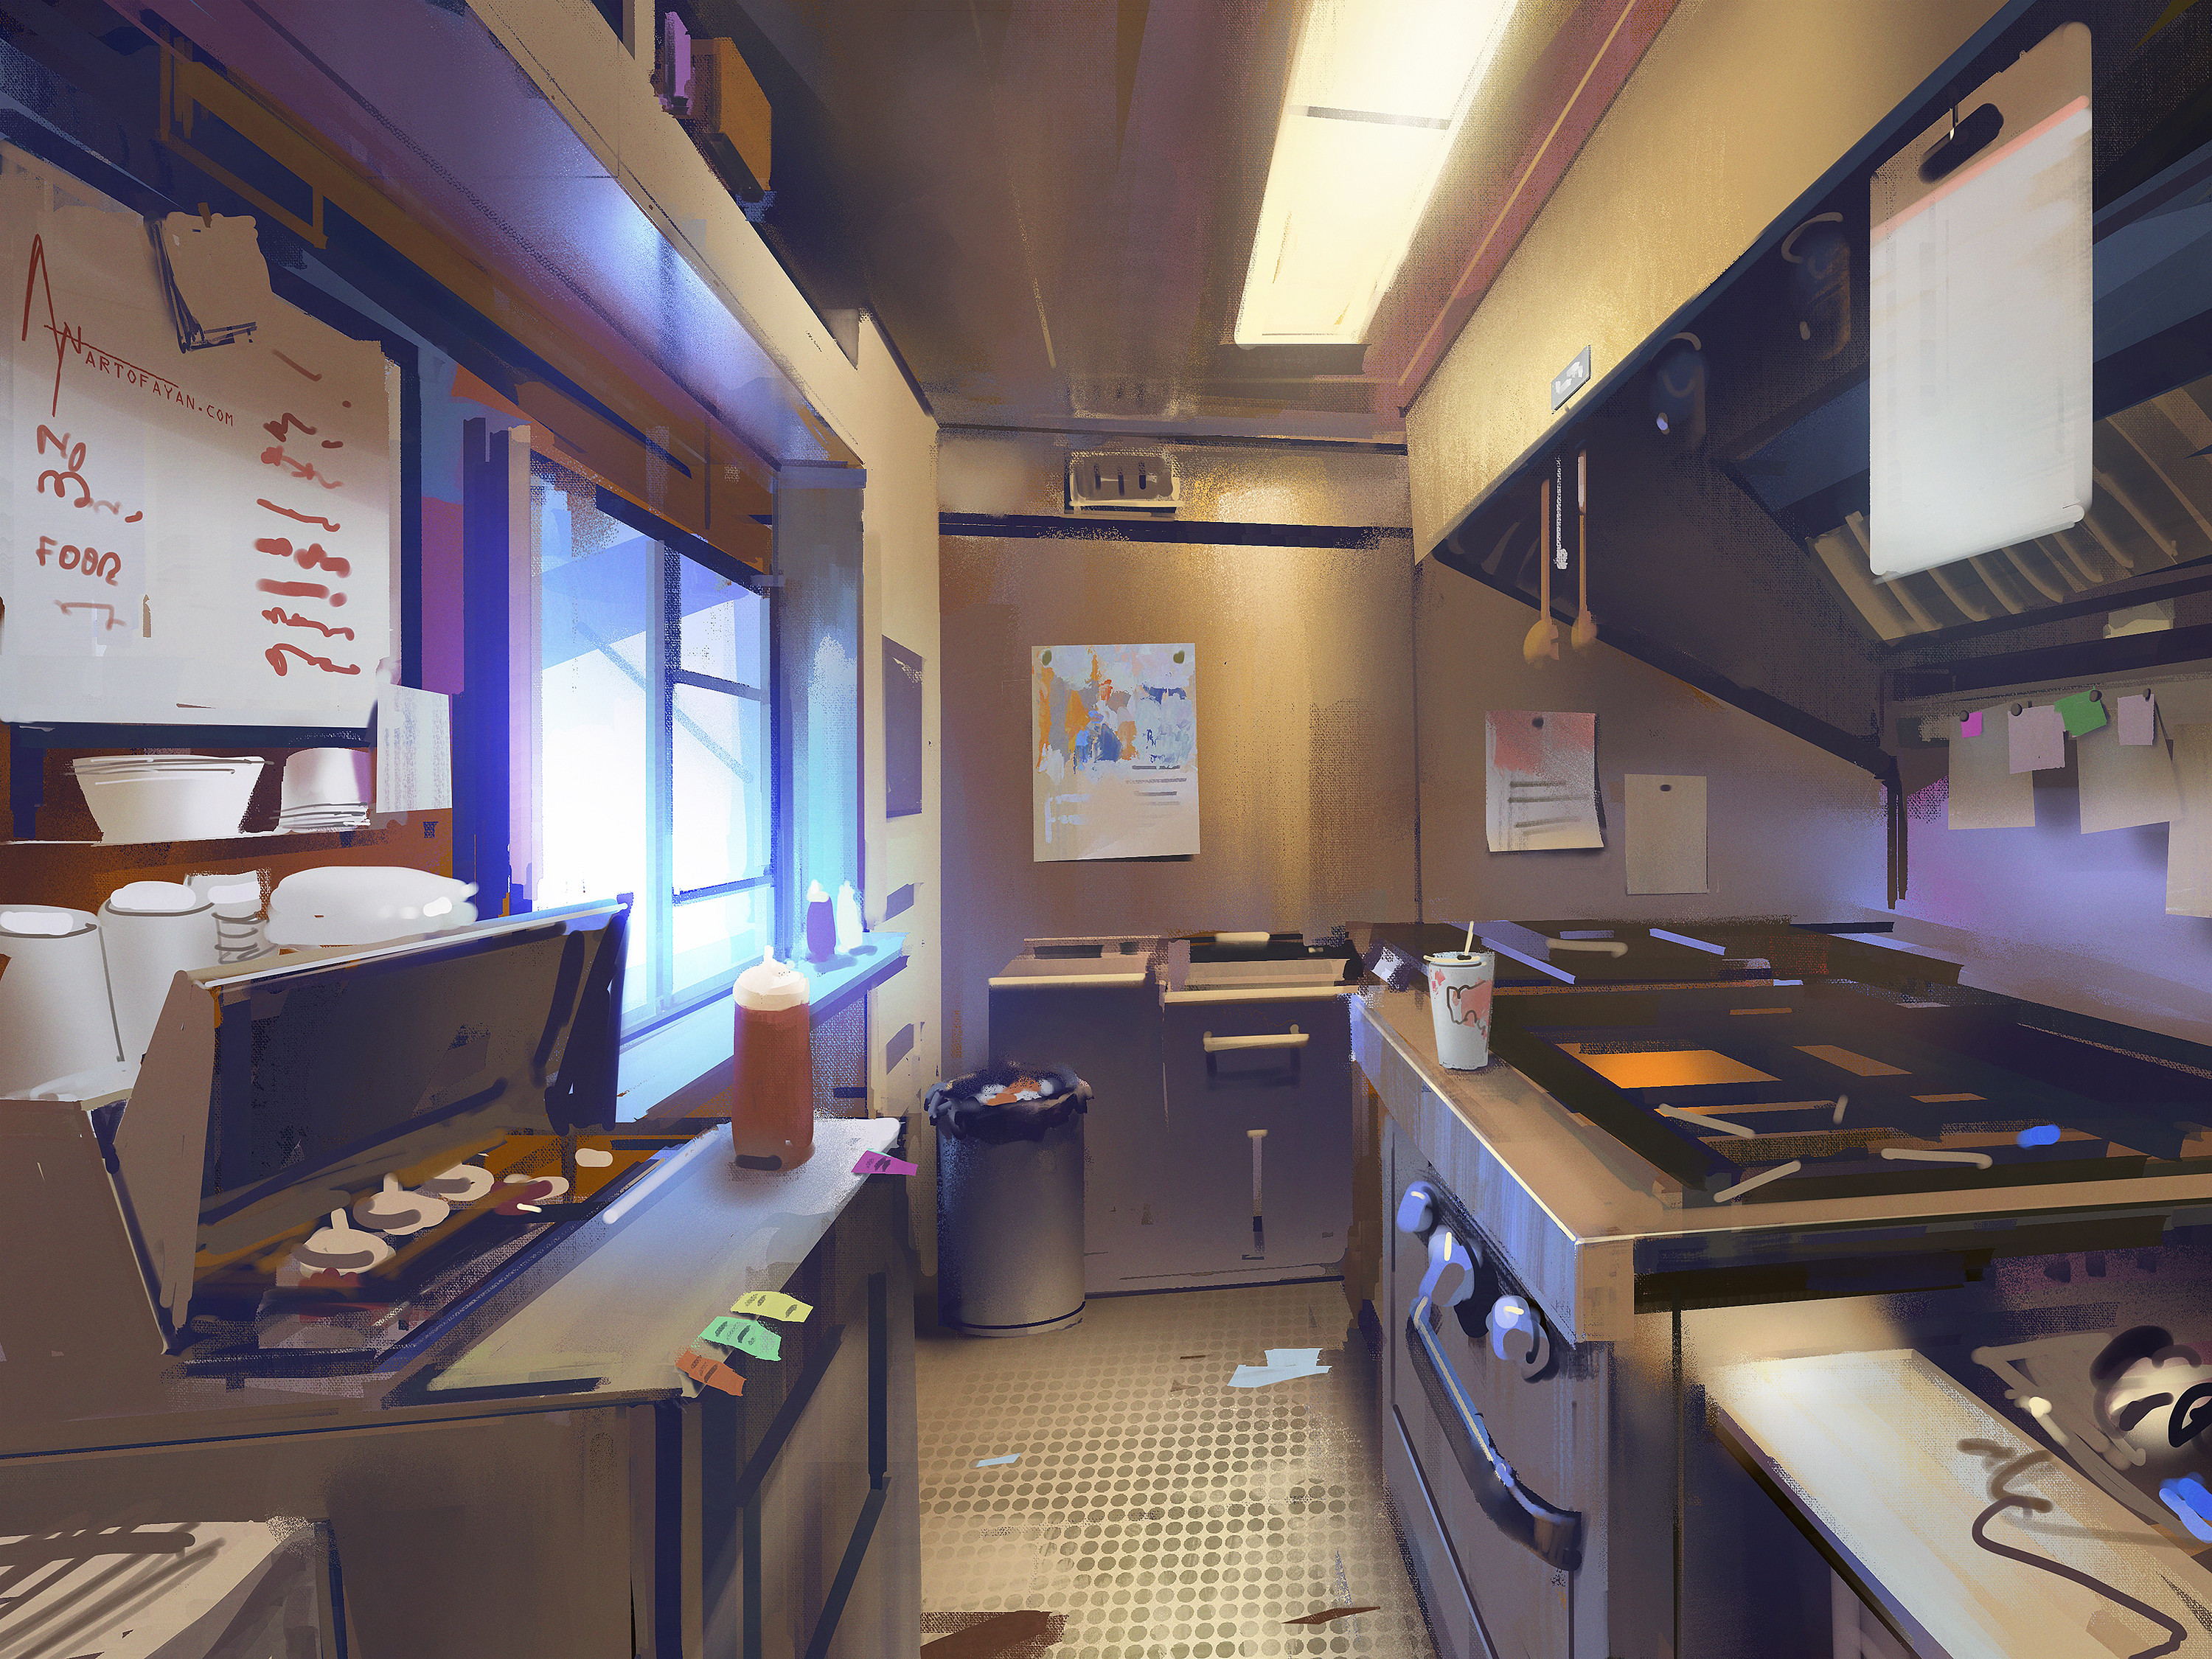 A fun interior painting of a food truck during the break(so I don’t have to paint humans )🙃